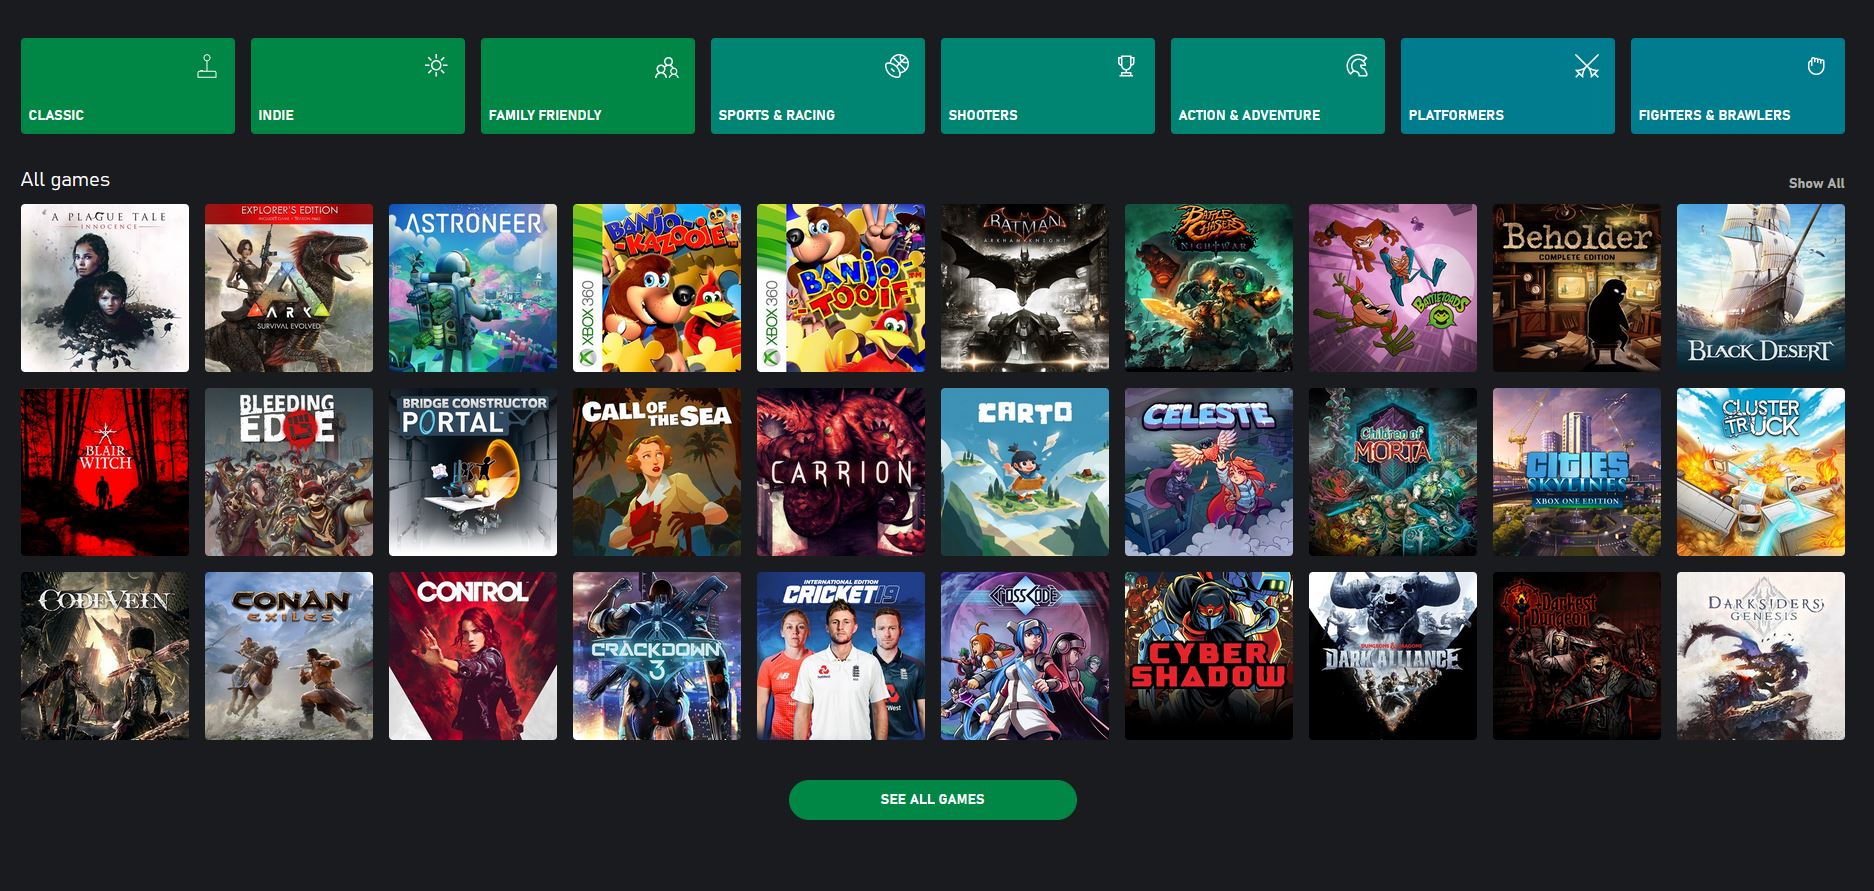 Xbox Game Pass Cloud Gaming Now on Consoles - Complete List of Games 